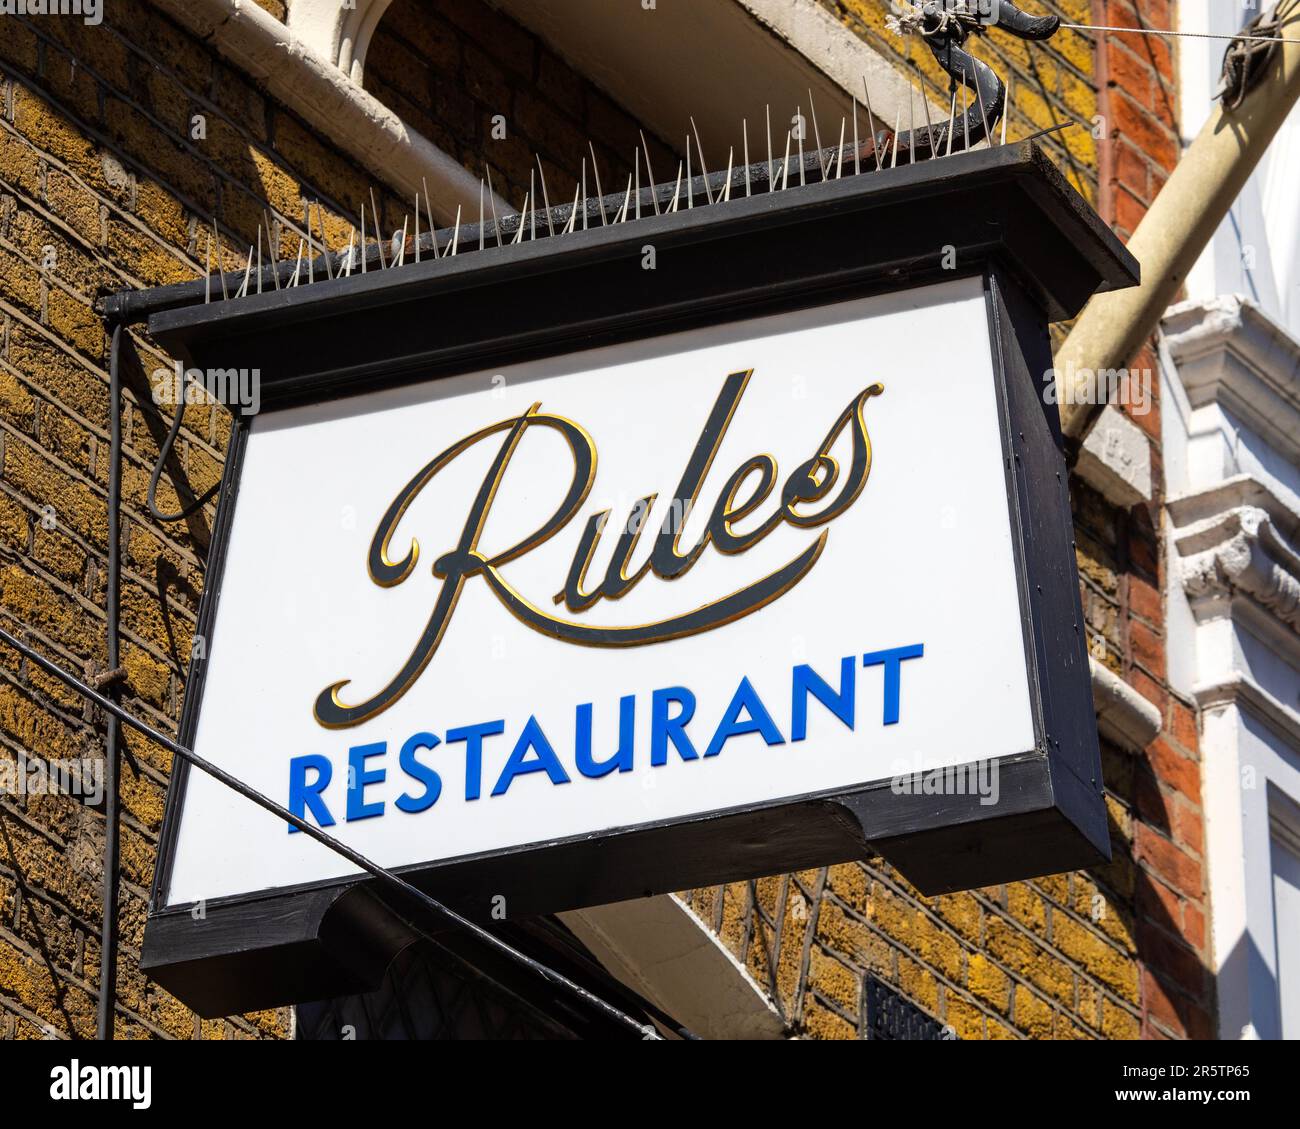 London, UK - April 20th 2023: The sign on the exterior of the famous Rules restaurant, located on Maiden Lane in London, UK.  The restaurant opened in Stock Photo